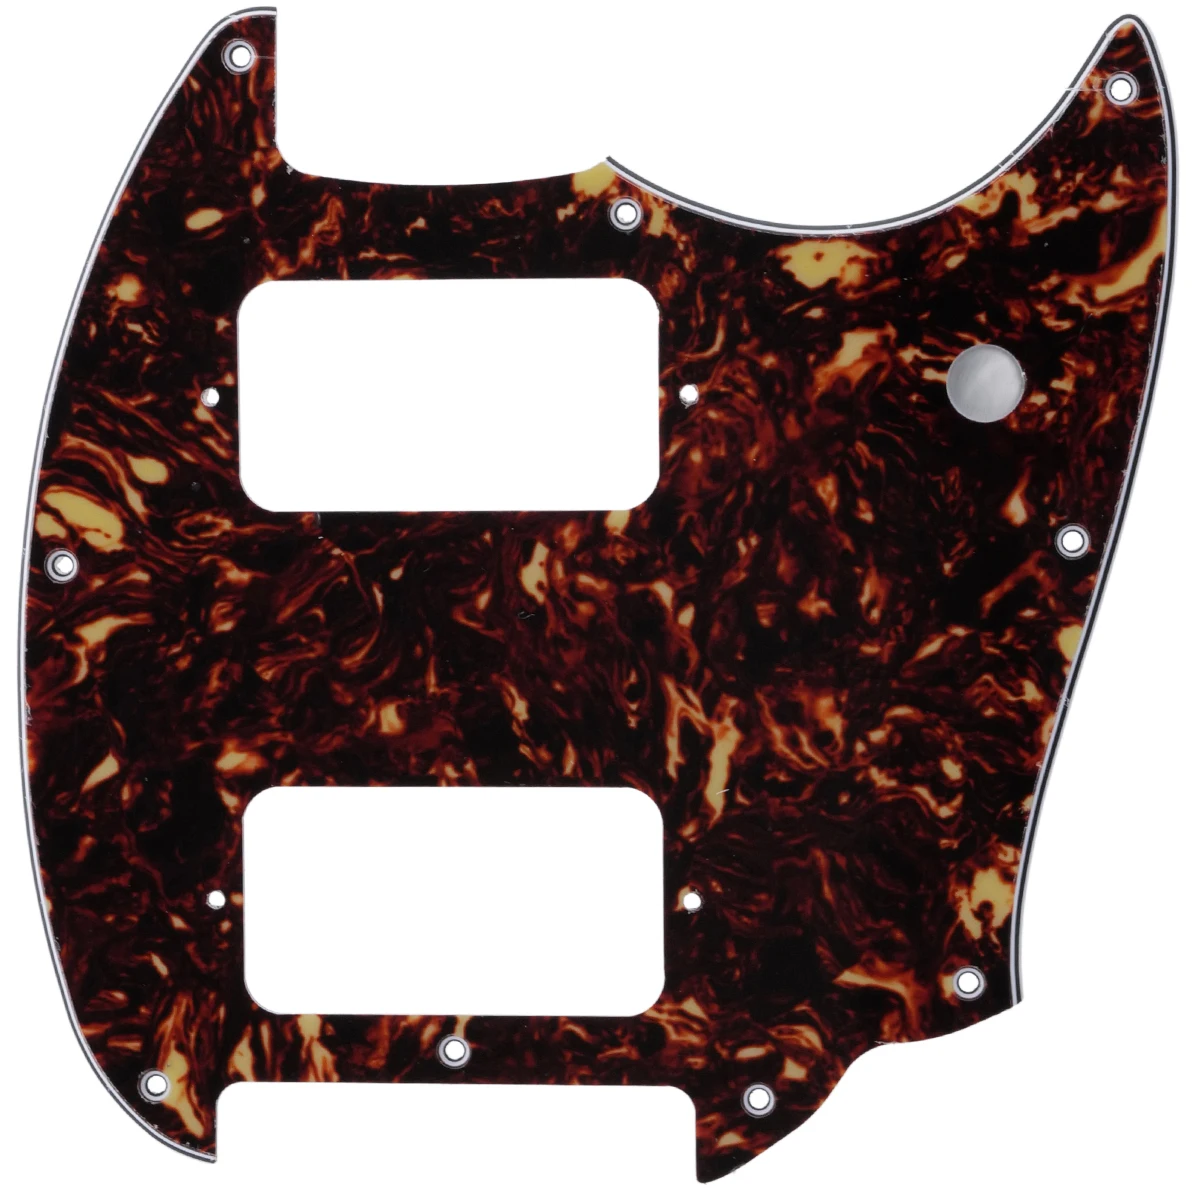 Musiclily Pro 9 Holes Round Corner HH Guitar Pickguard 2 Humbuckers for Squier Bullet Series Mustang, 4Ply Tortoise Shell